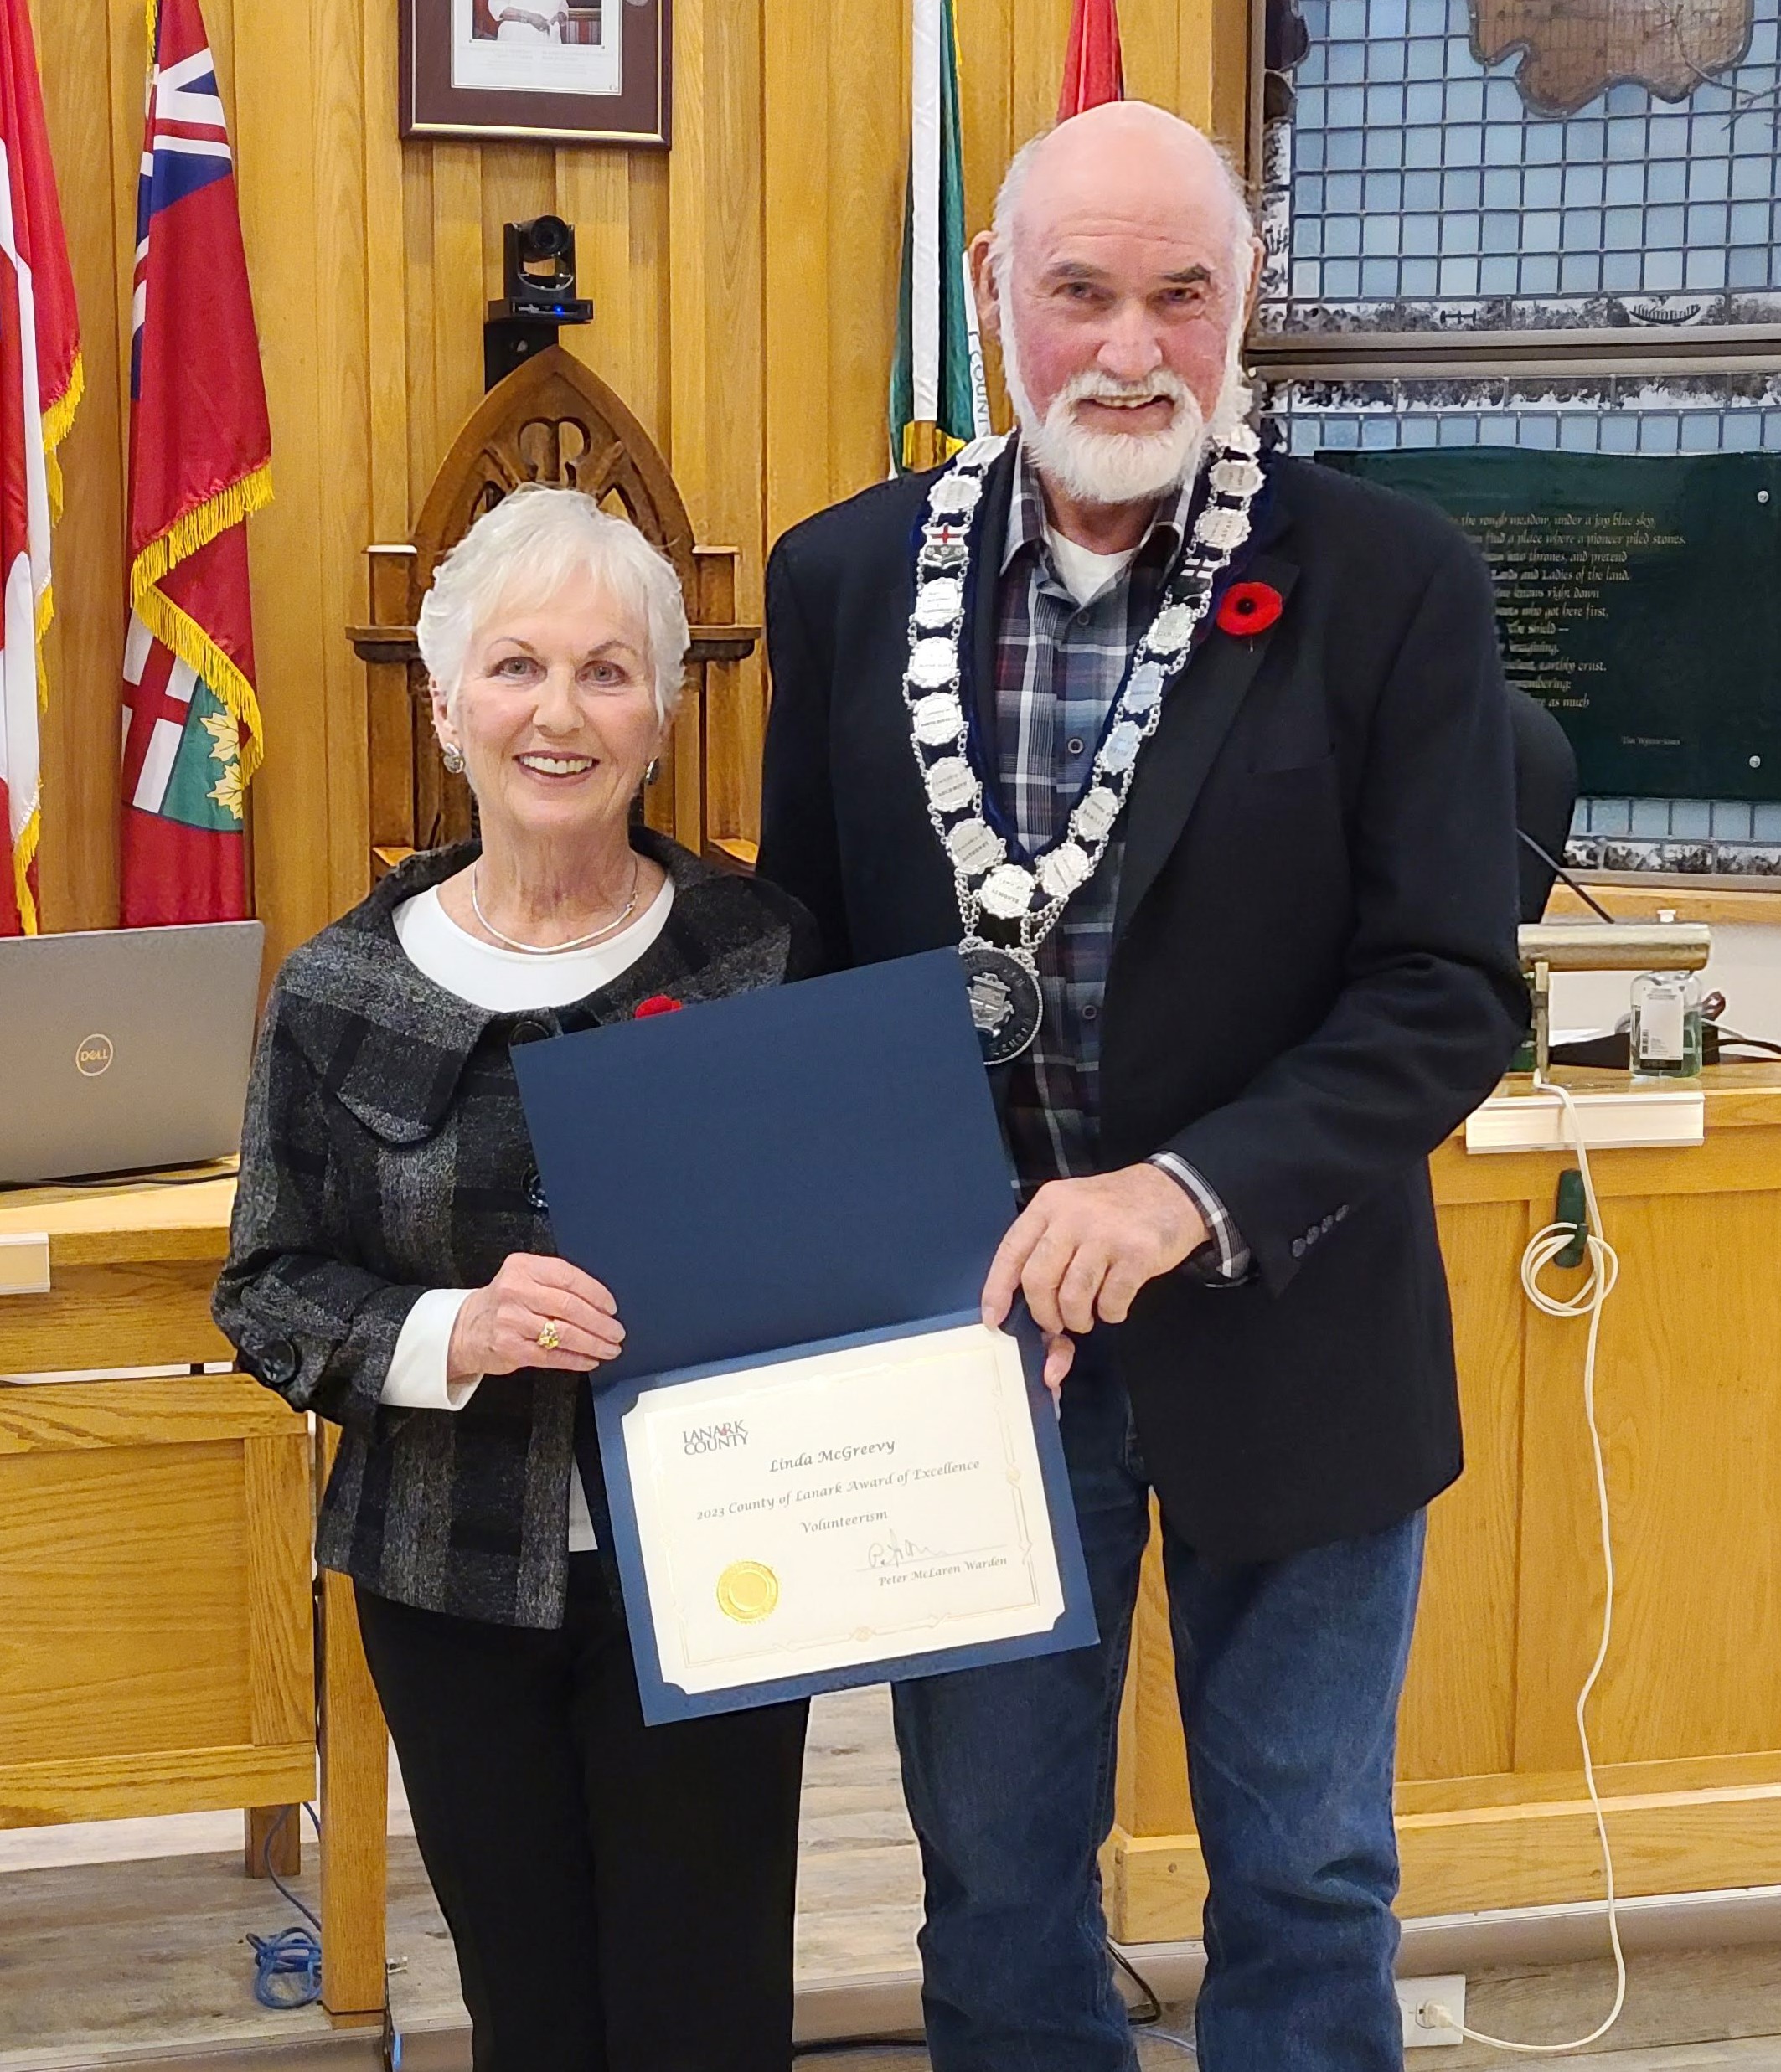 Lanark County Warden Peter McLaren, right, presents an Award of Excellence to Linda McGreevy, left, with the Carleton Place & District Memorial Hospital Foundation Board.